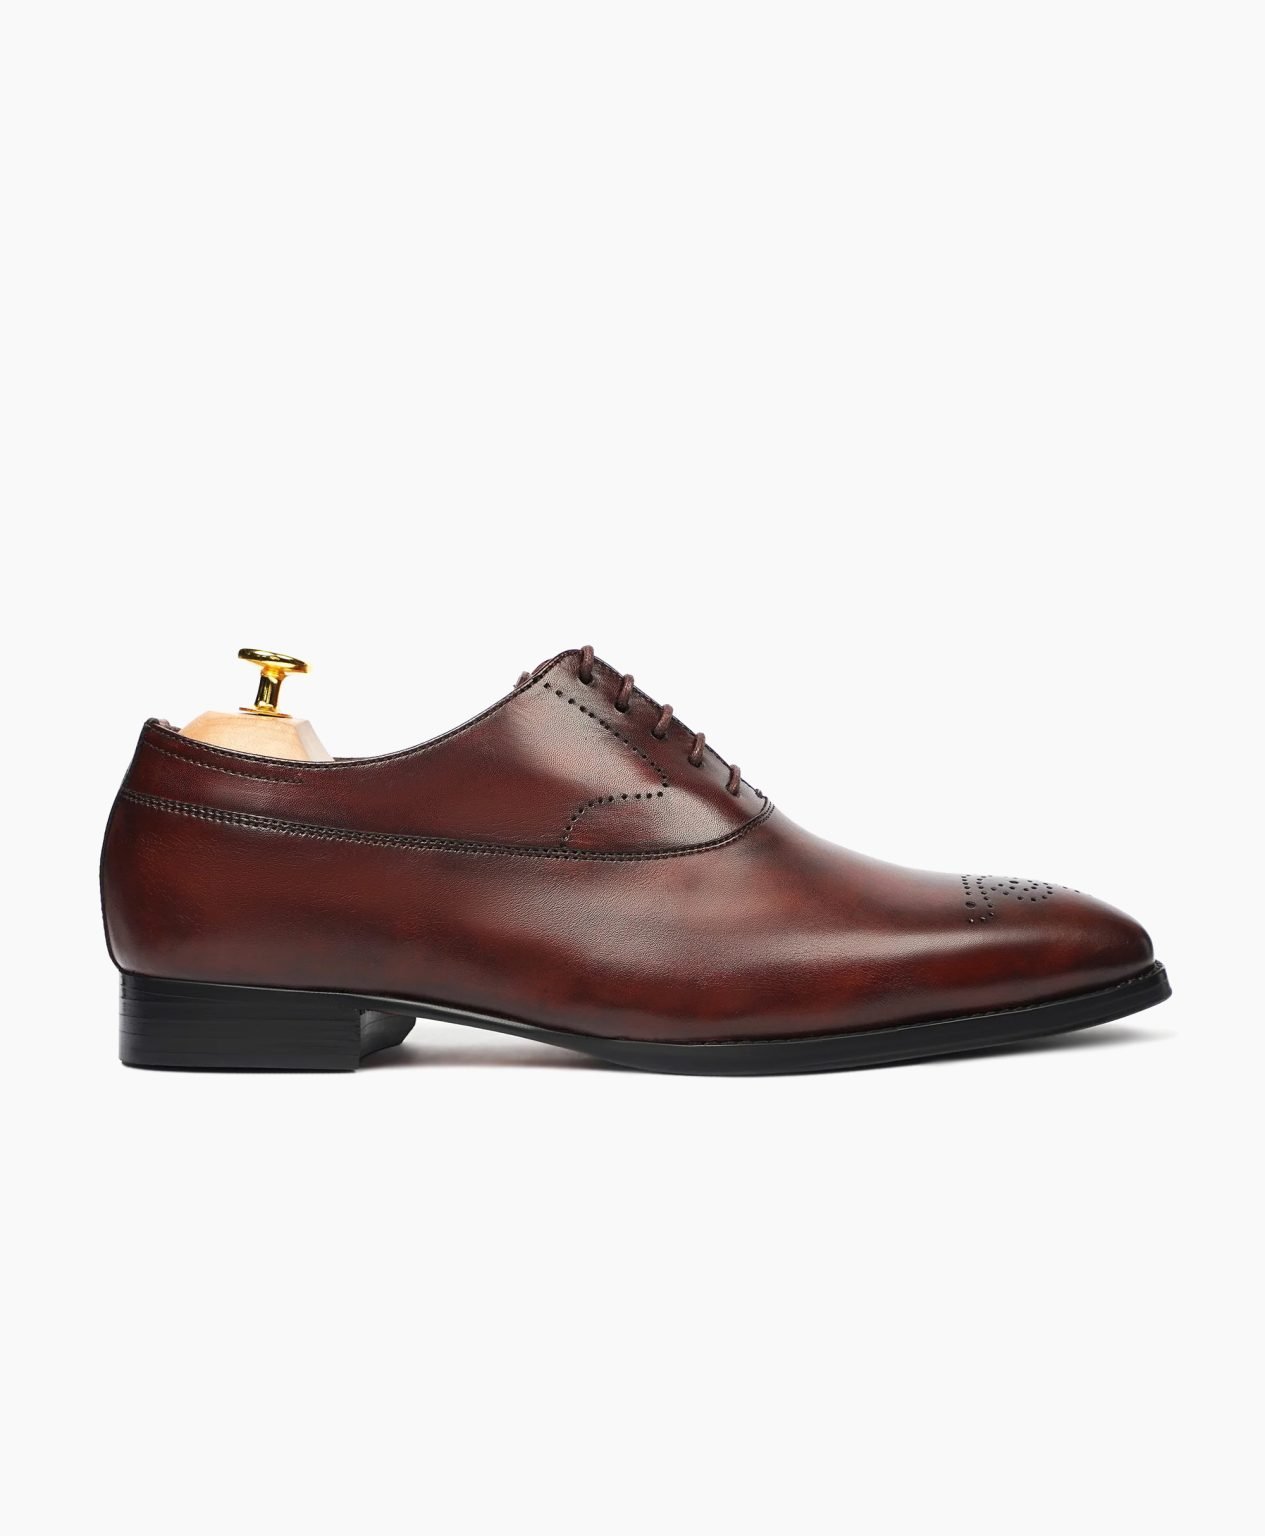 wycombe-oxford-oxblood-leather-shoes-image201